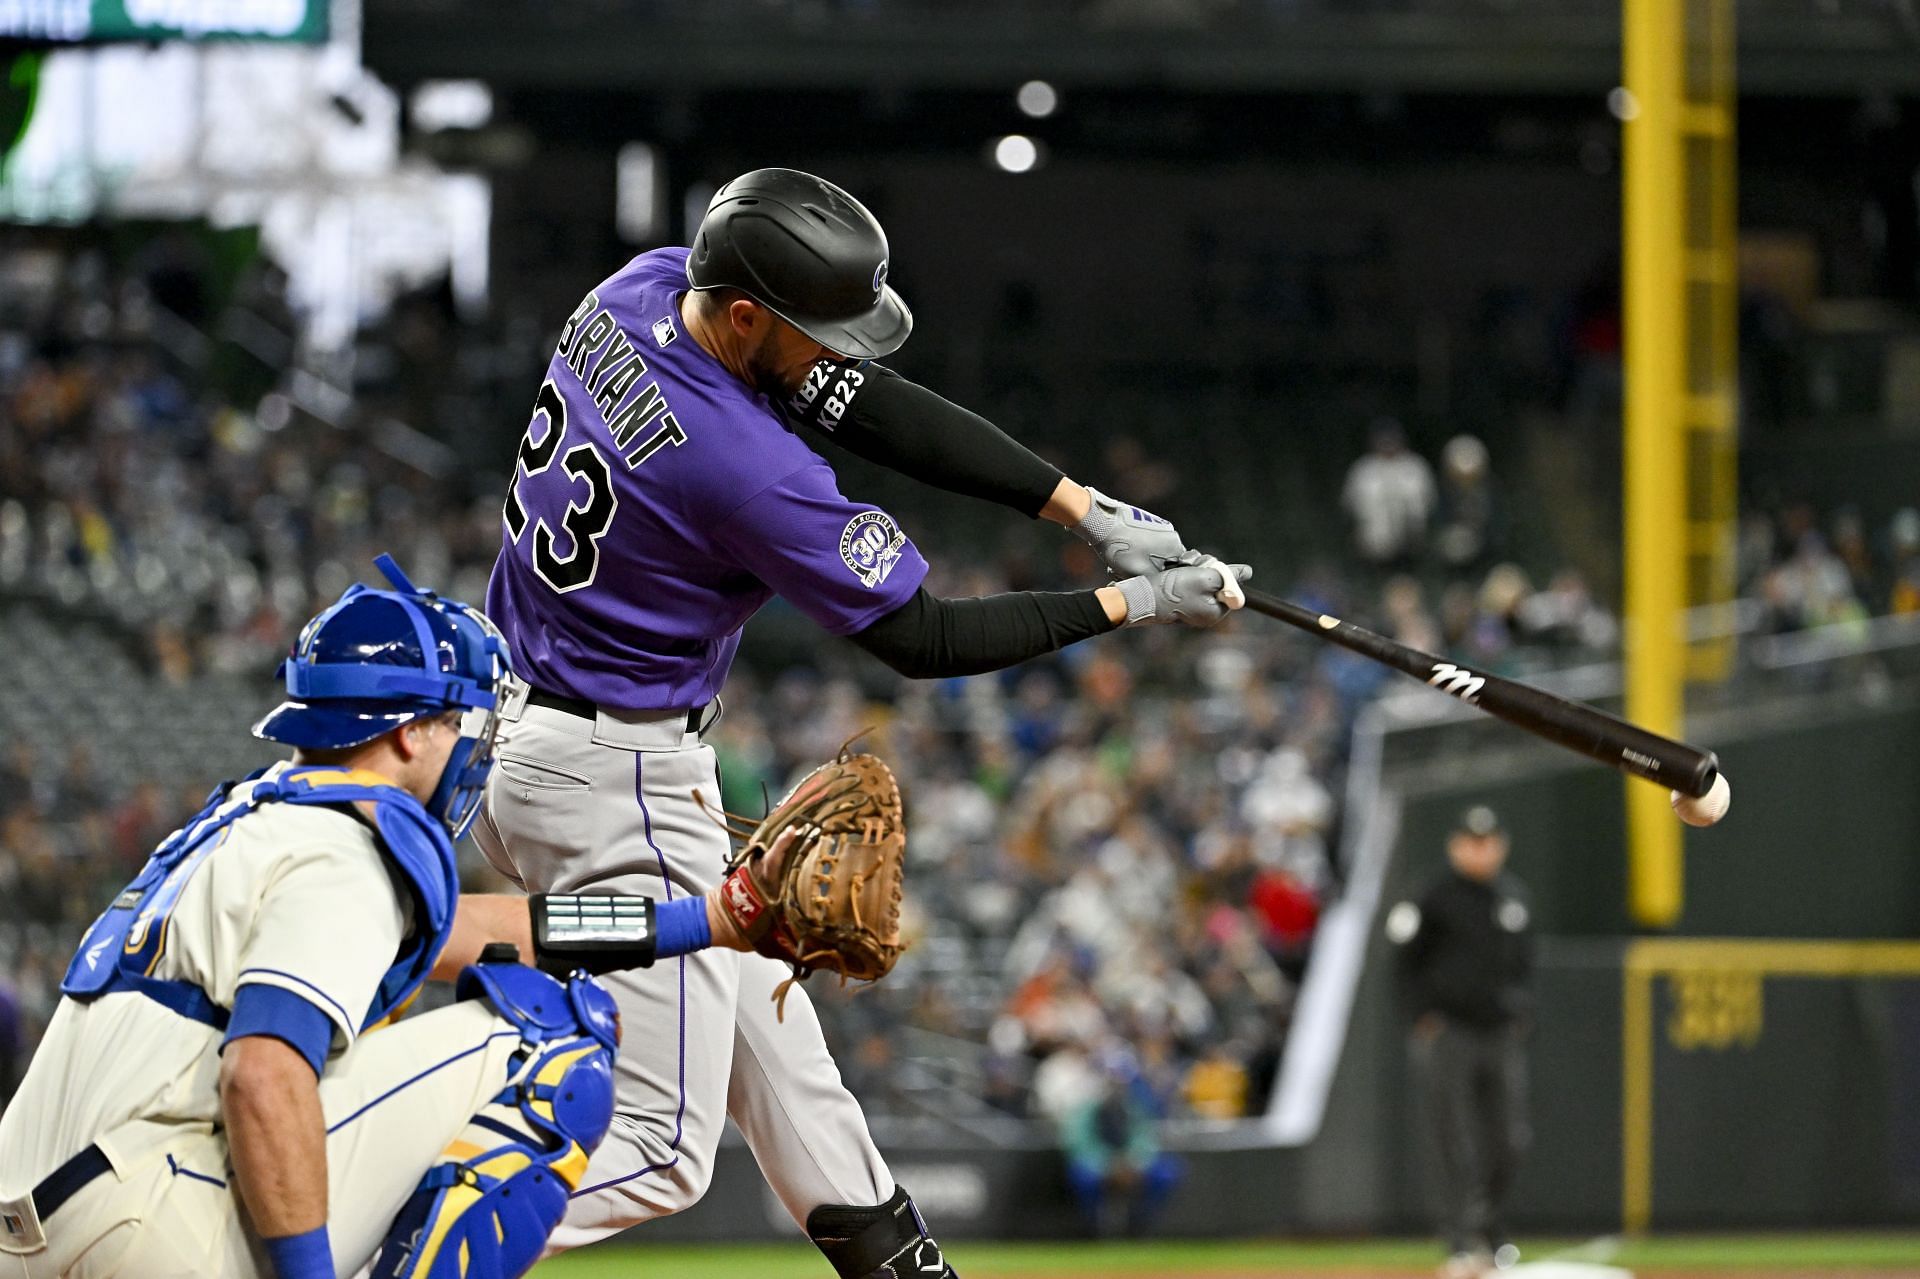 Colorado Rockies v Seattle Mariners SEATTLE, WASHINGTON - APRIL 16: Kris Bryant #23 of the Colorado Rockies bats during the first inning against the Seattle Mariners at T-Mobile Park on April 16, 2023 in Seattle, Washington. (Photo by Alika Jenner/Getty Images)